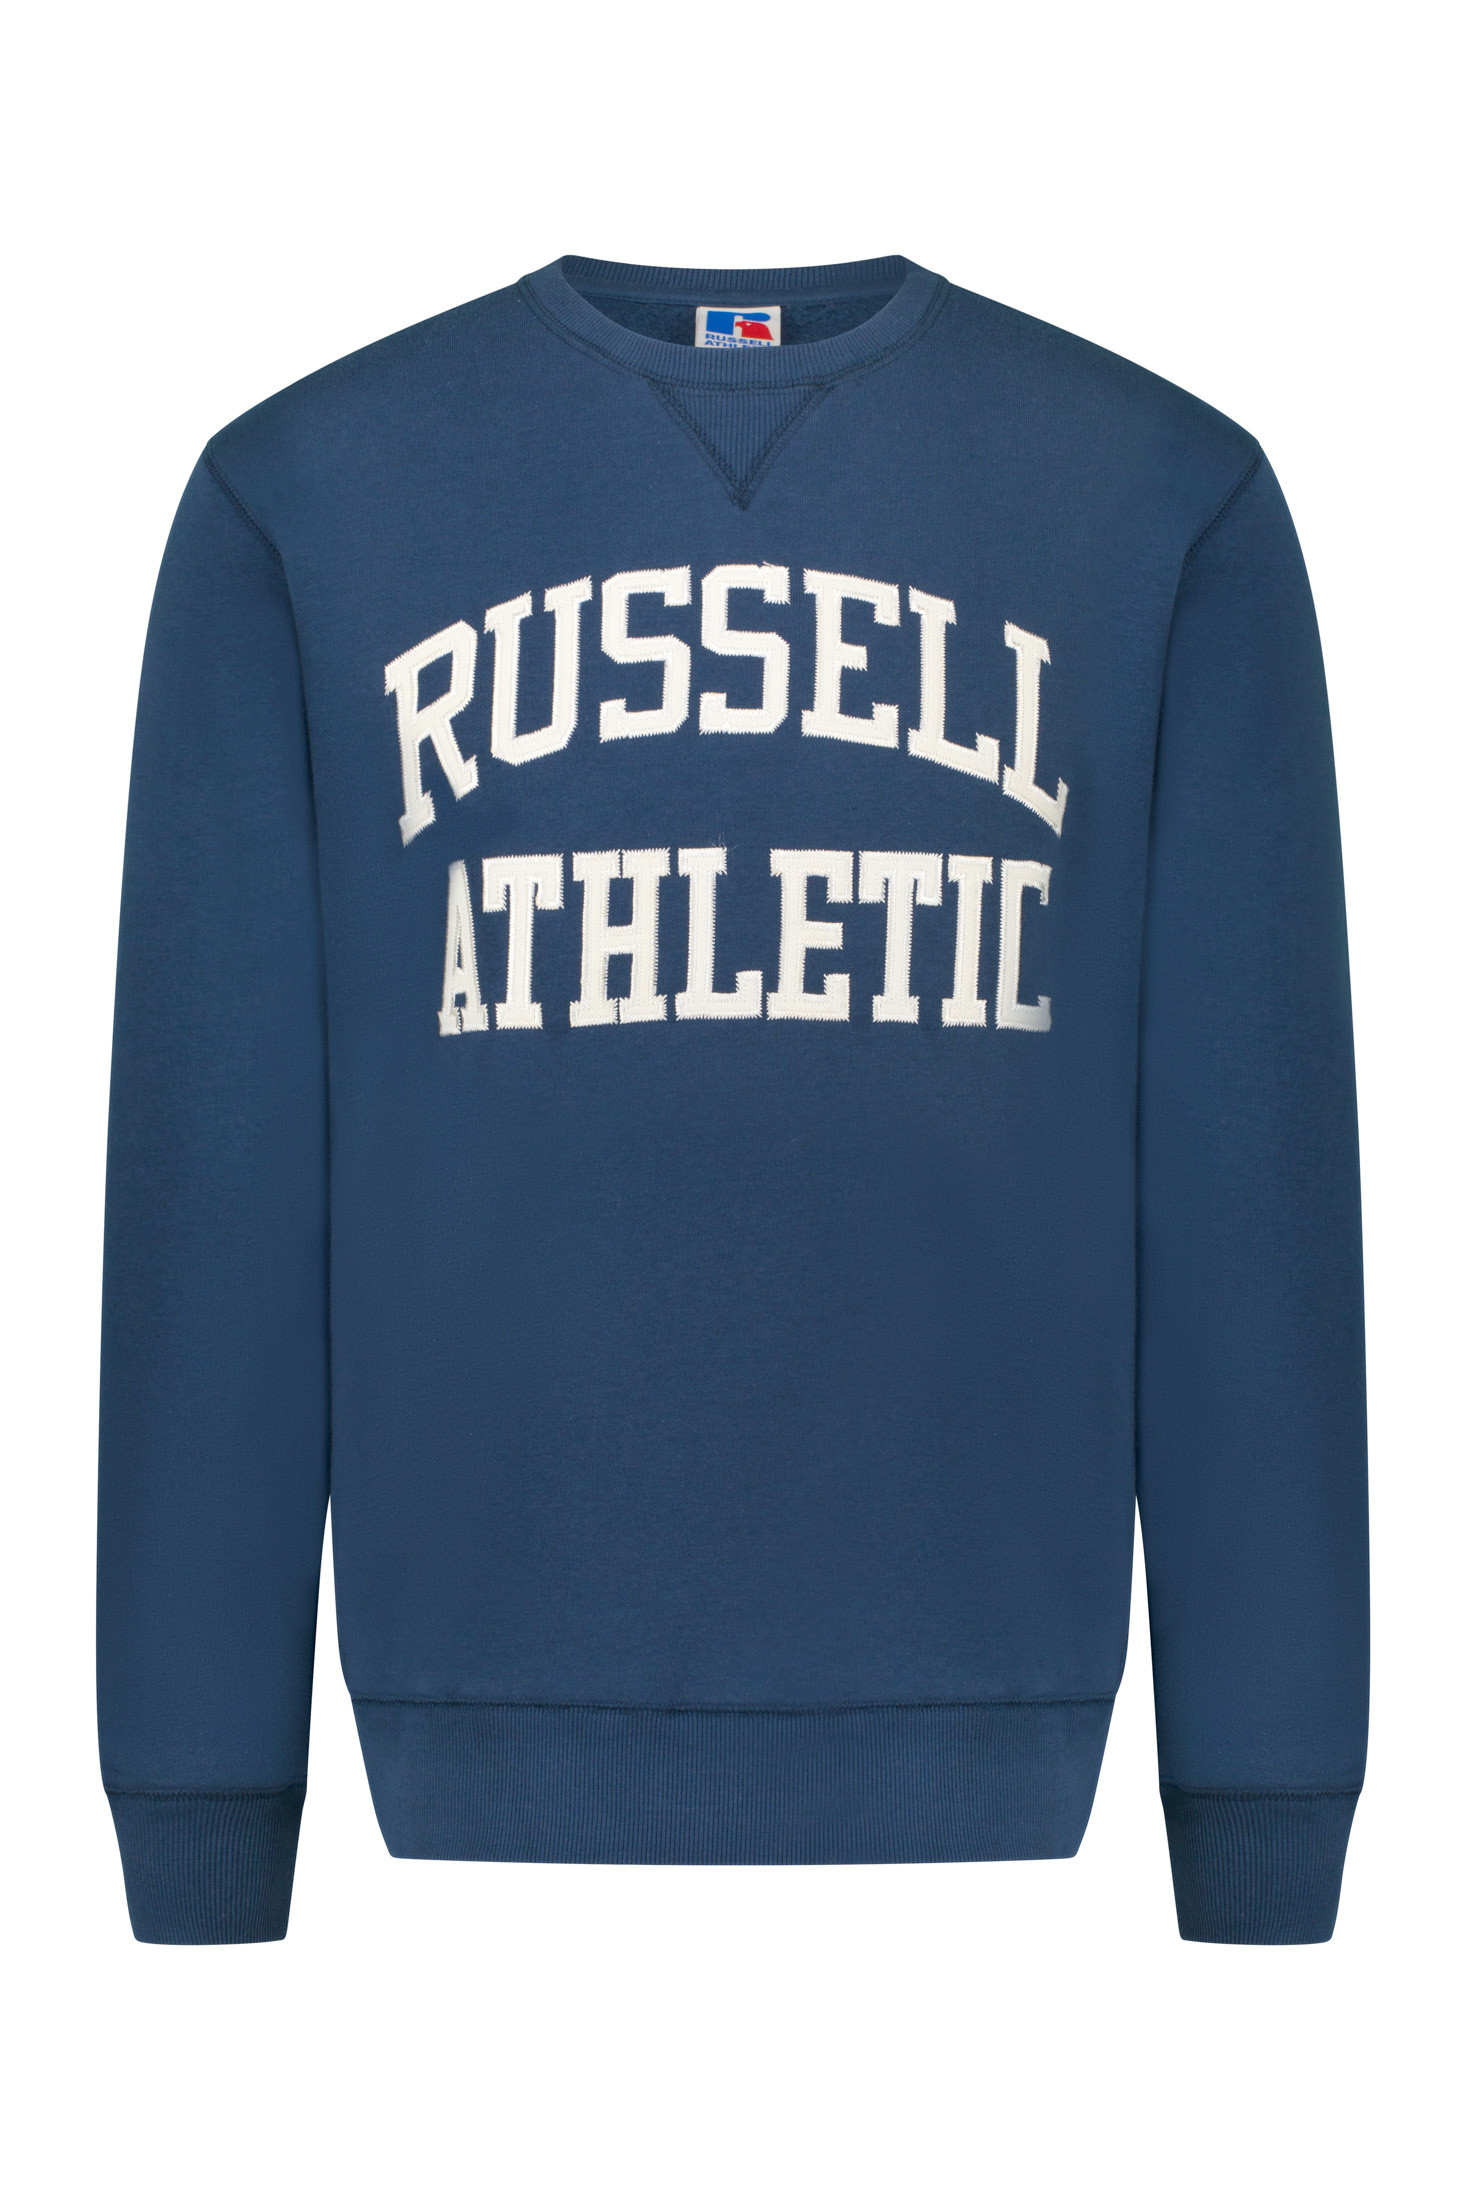 Russell Athletic - Felpa con ricamo, Blu, large image number 0